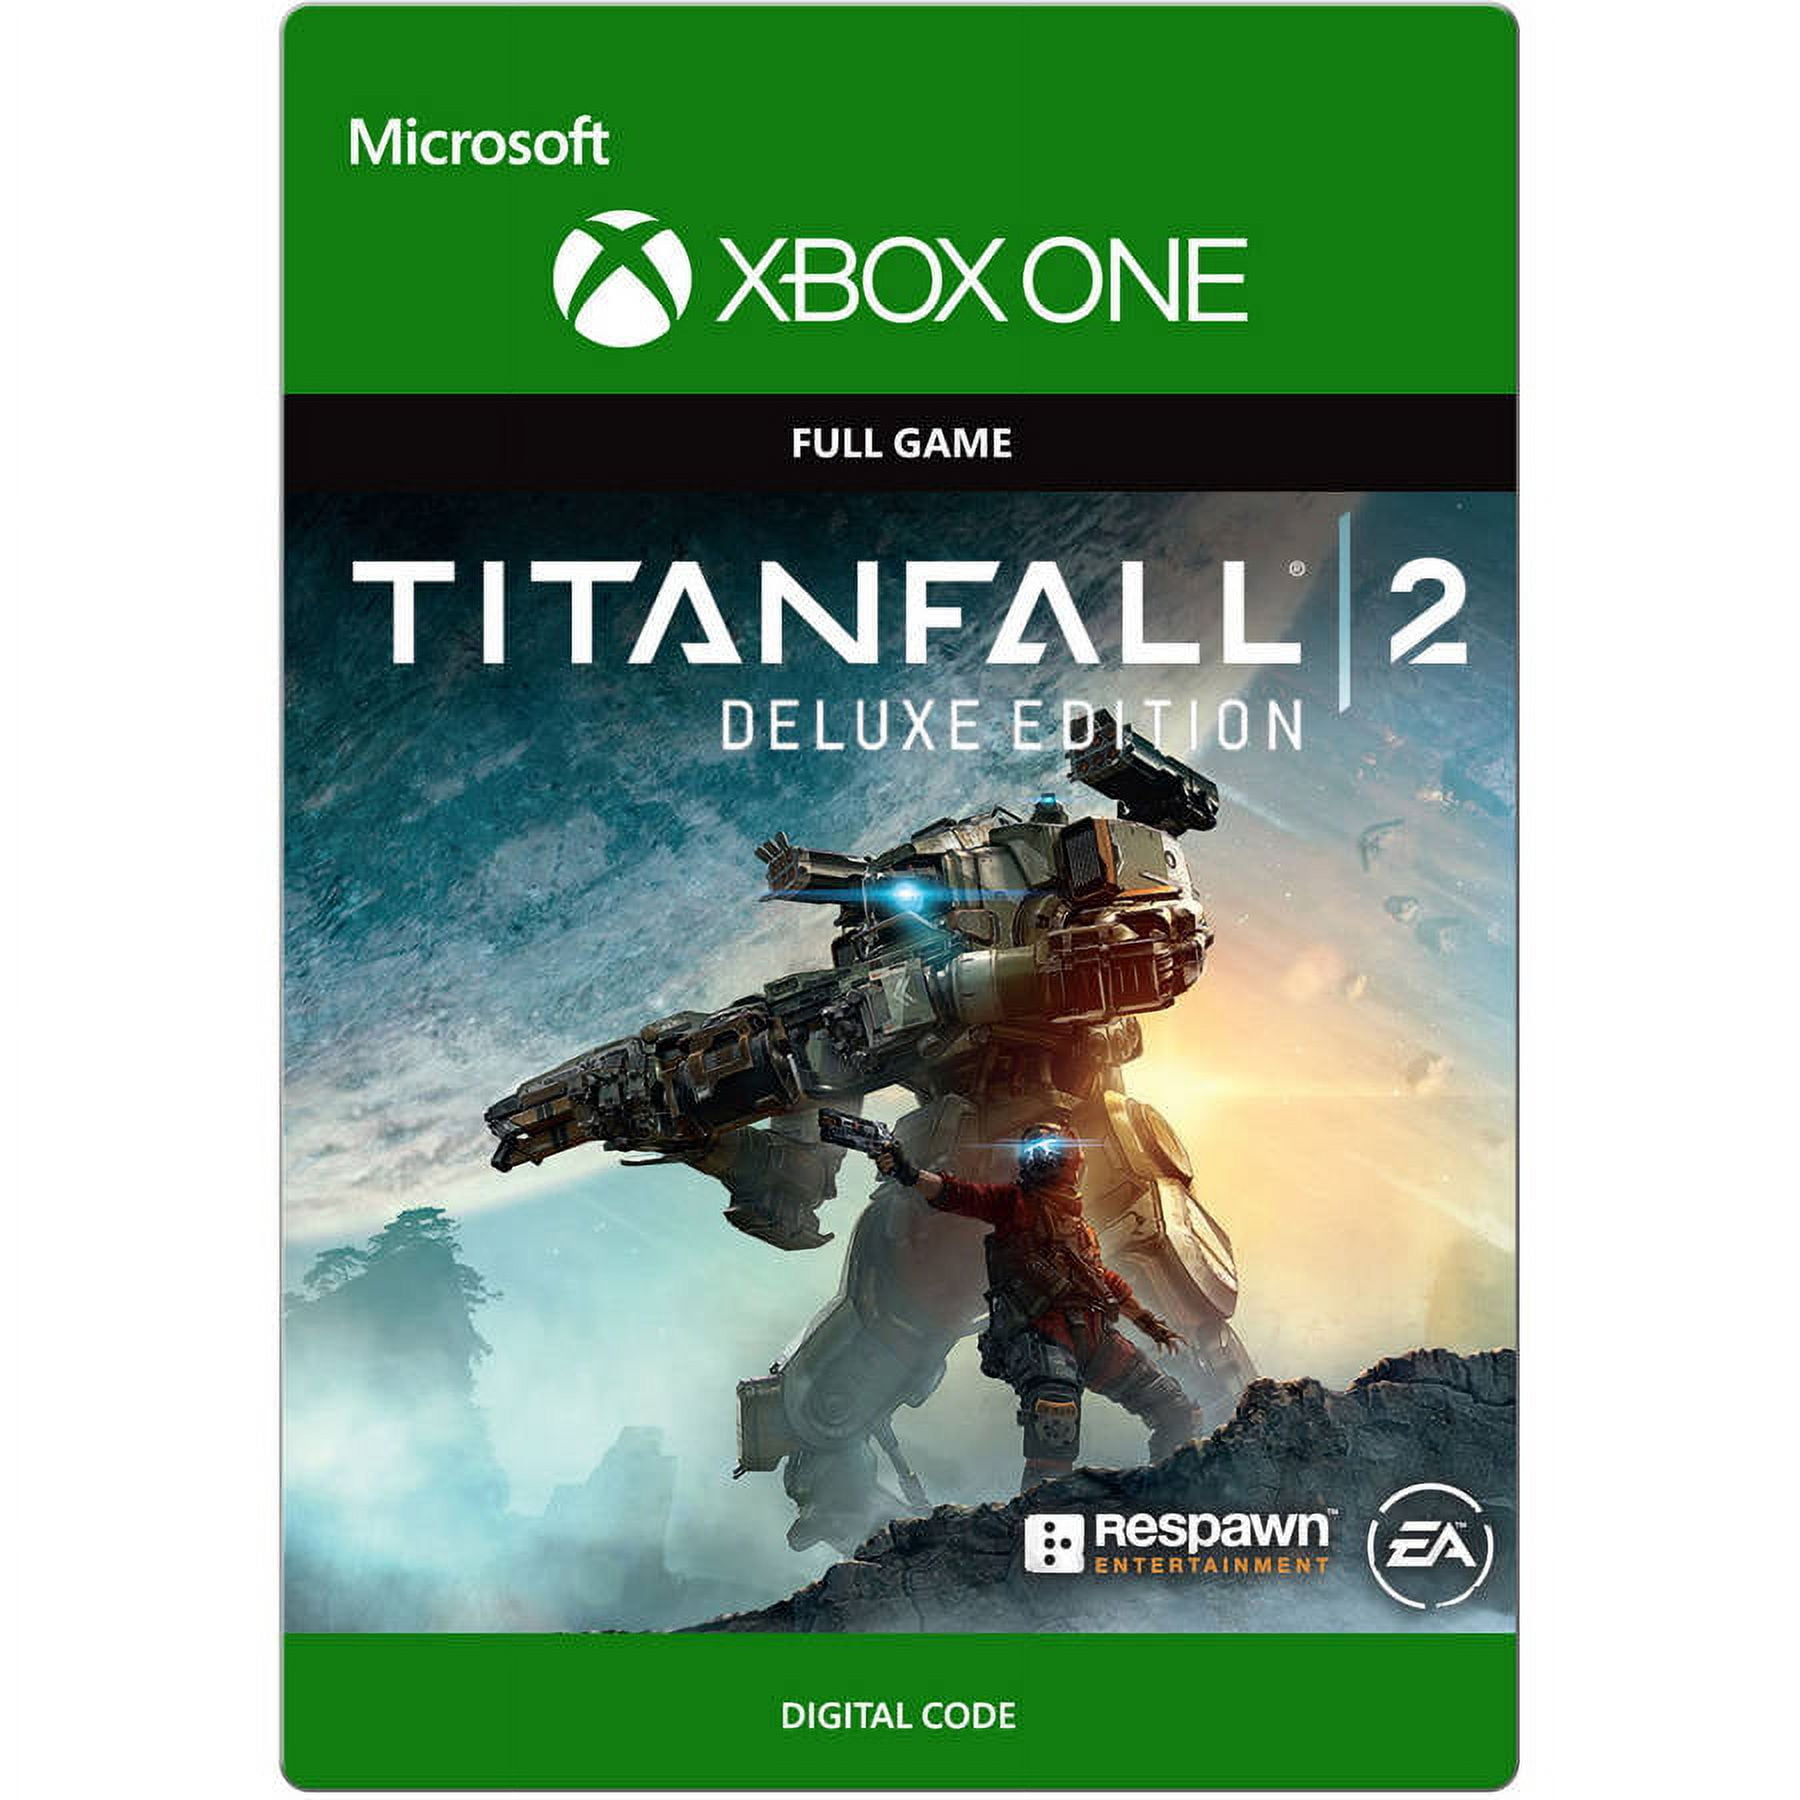 Titanfall 3 shows up on Instant Gaming : r/titanfall